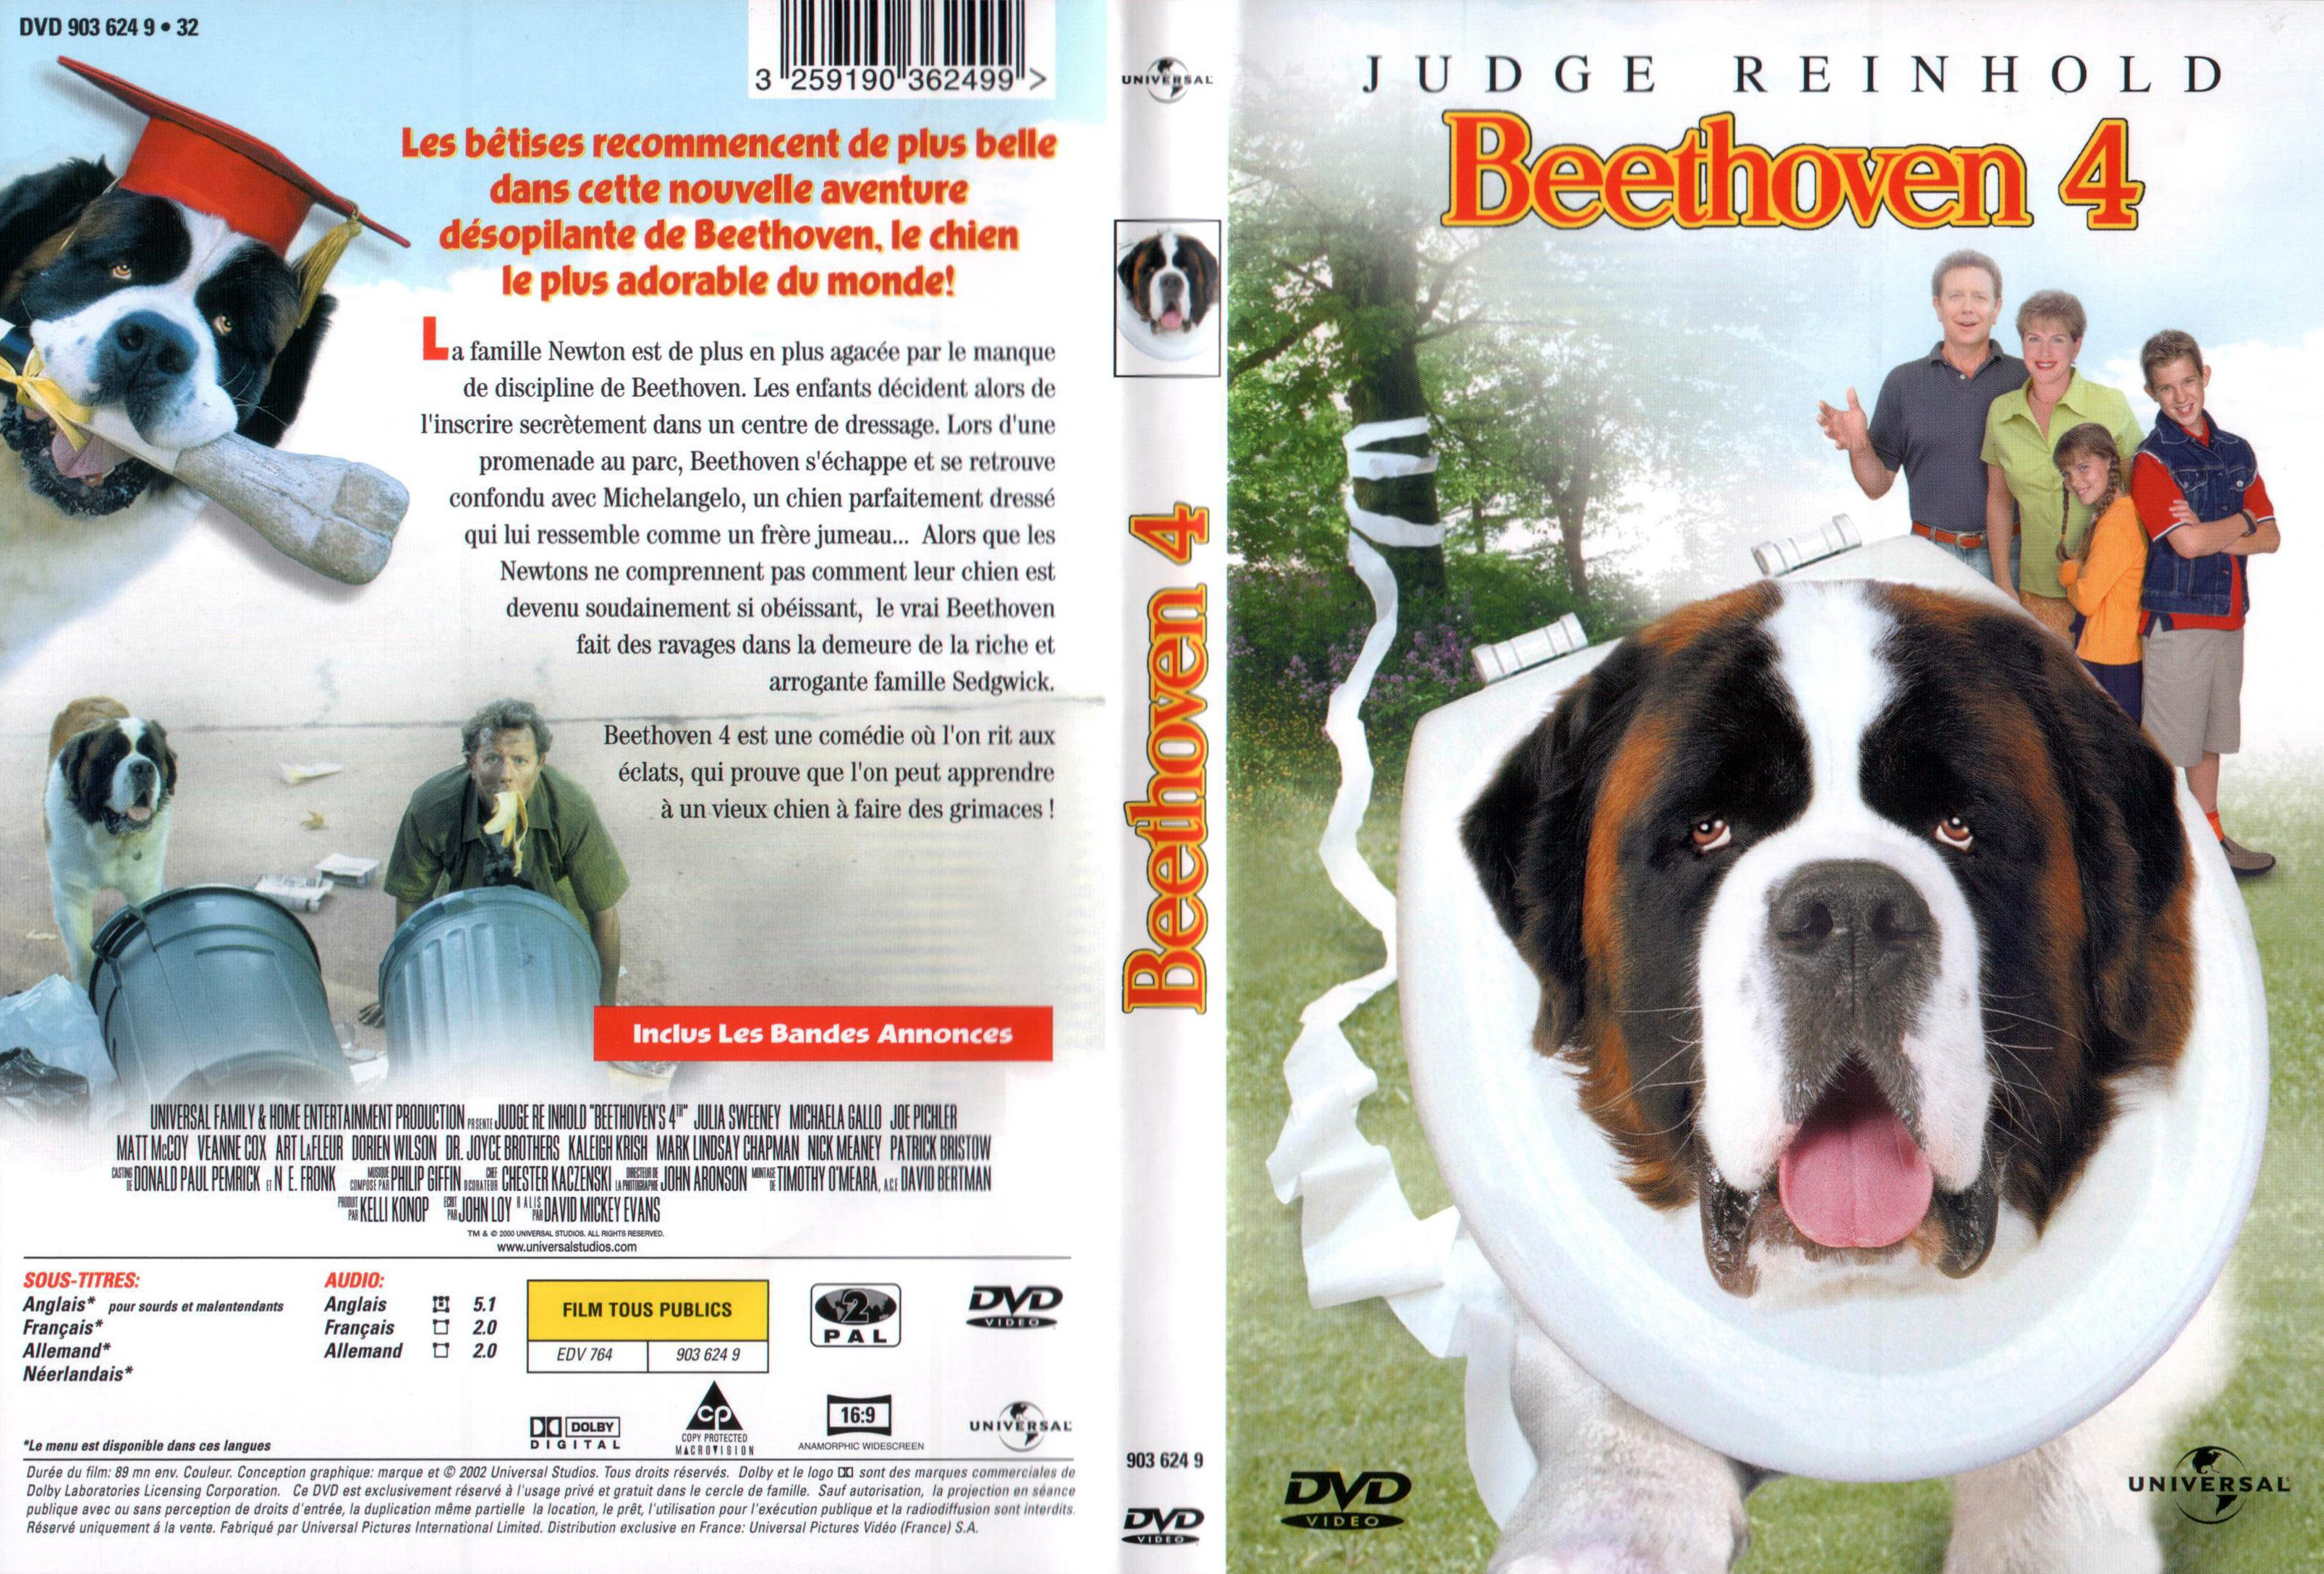 Jaquette DVD Beethoven 4